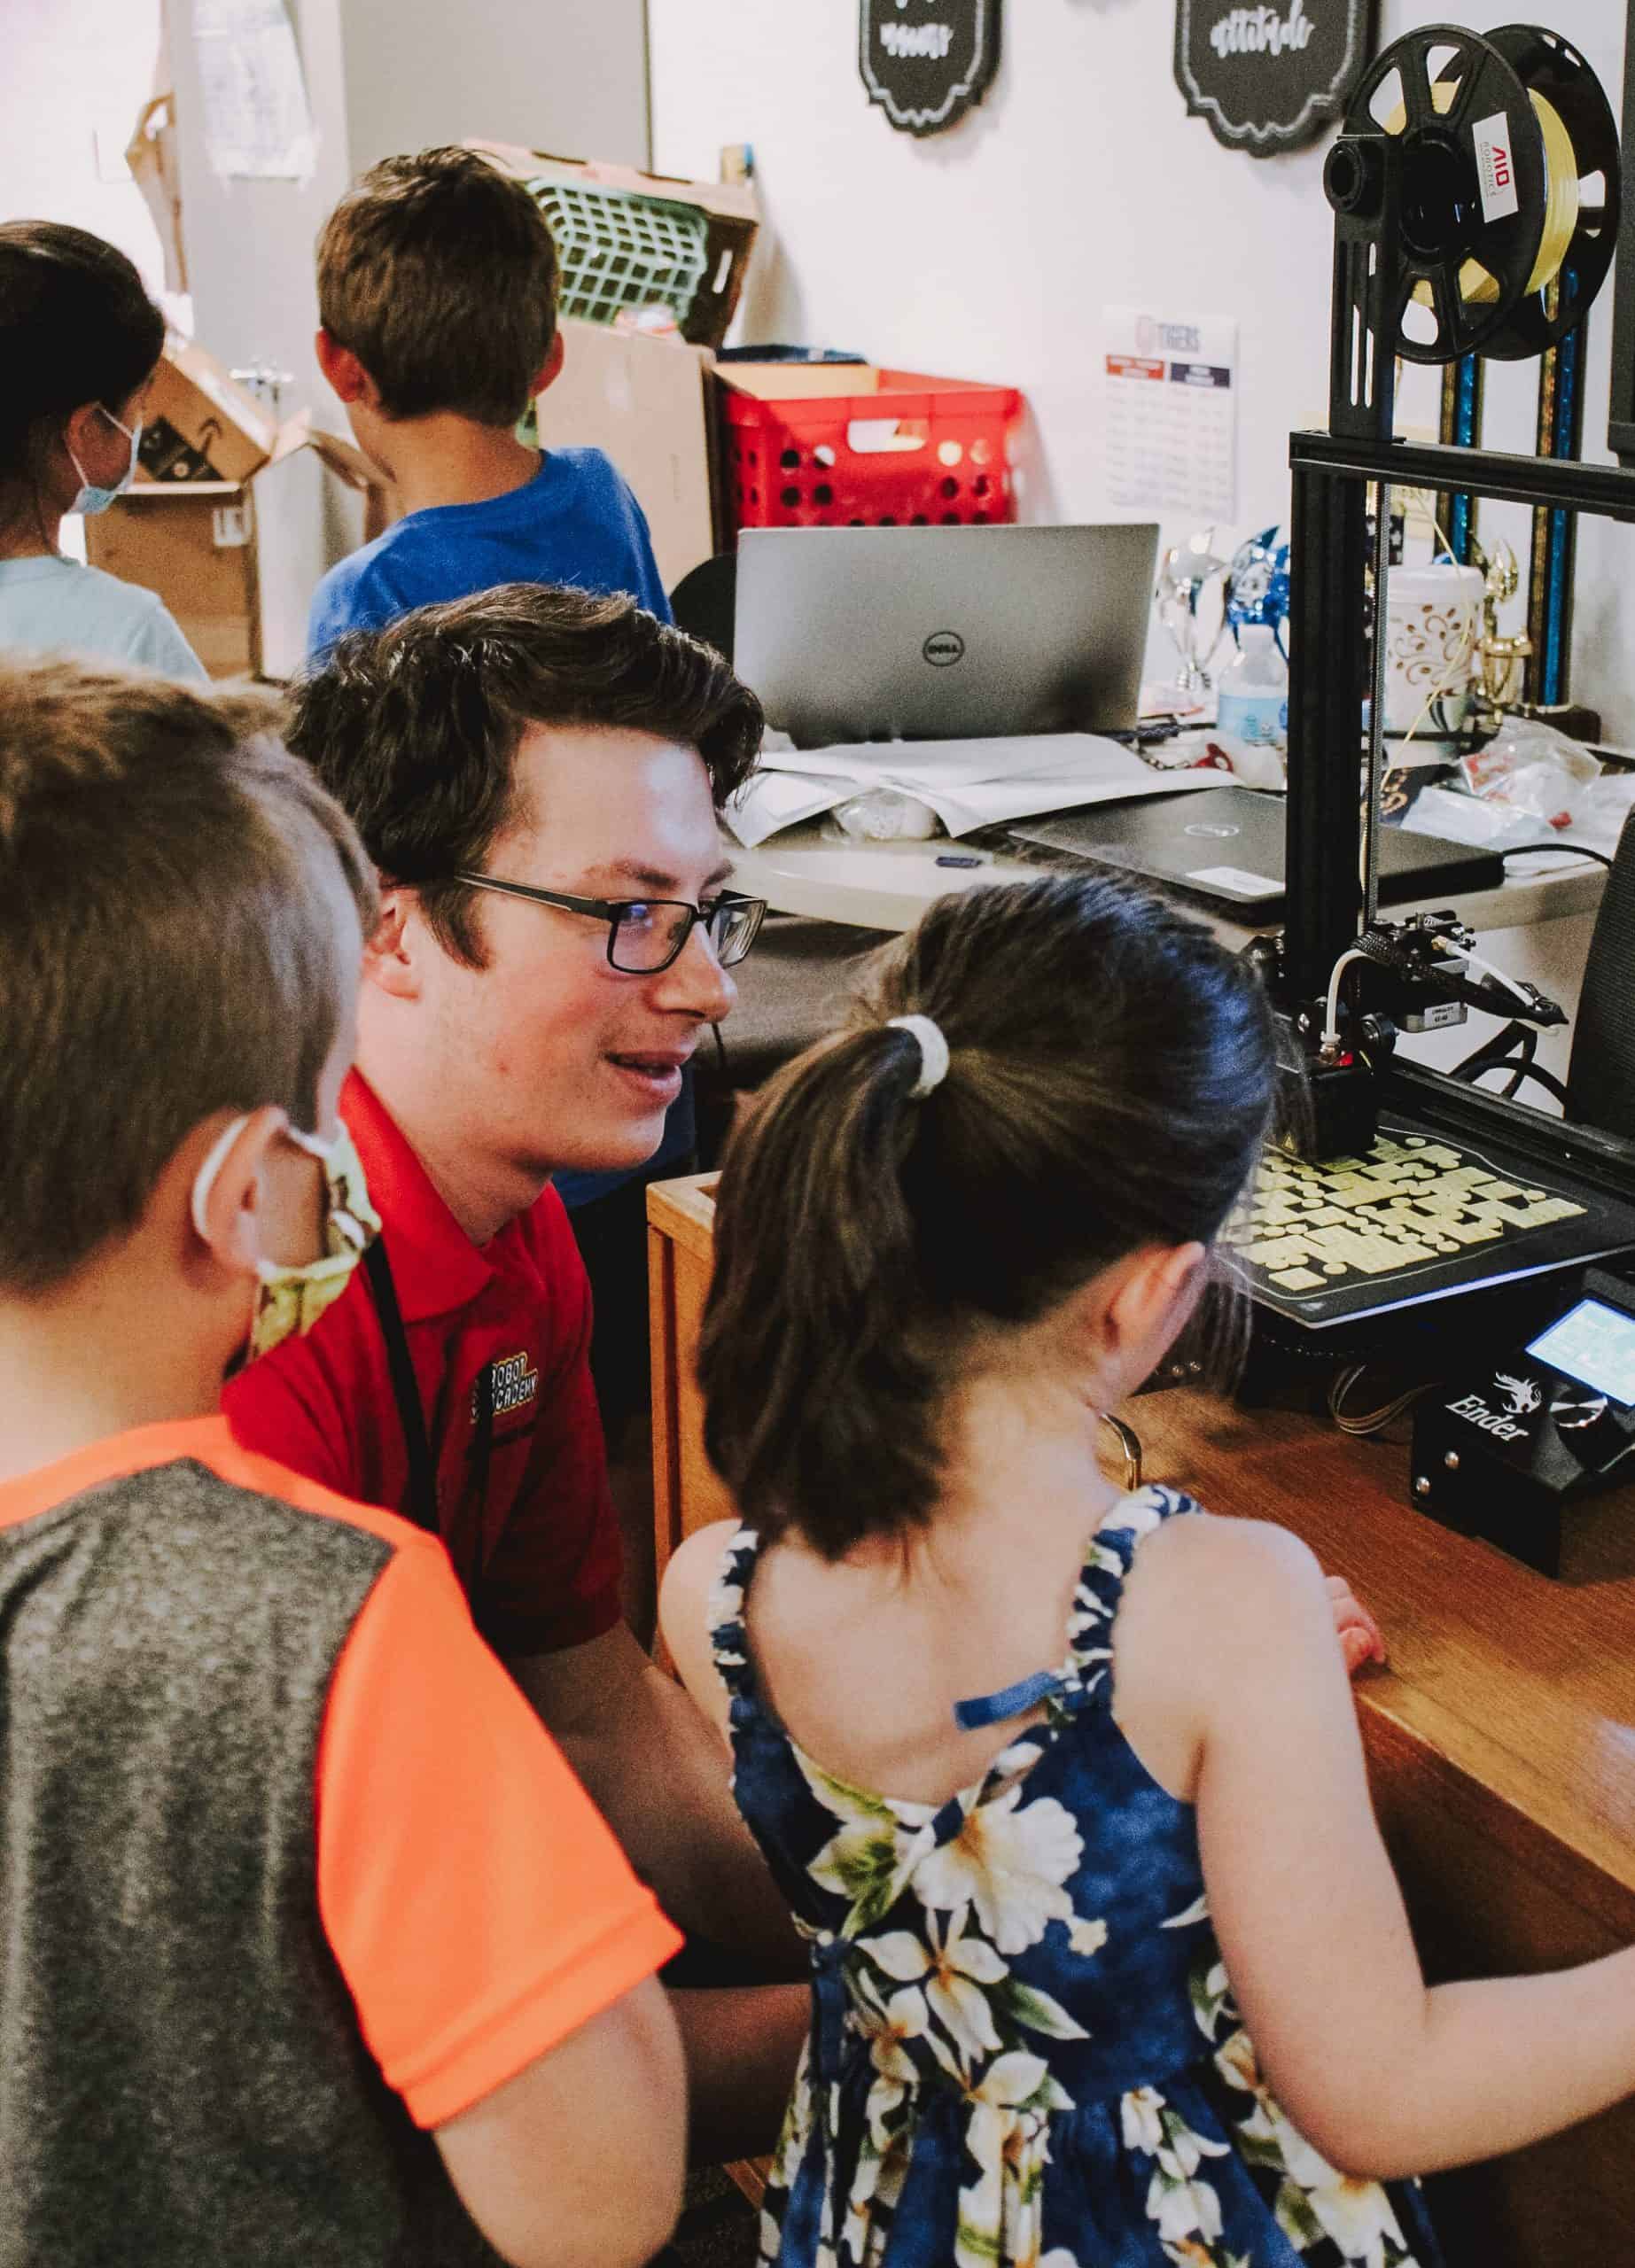 You are currently viewing Jr. LEGO® Robotics & 3D Printing Camp for ages 5 to 8 | Full Day | 2 Days: June 12-13, 2023 | 9 am to 5 pm | Dublin